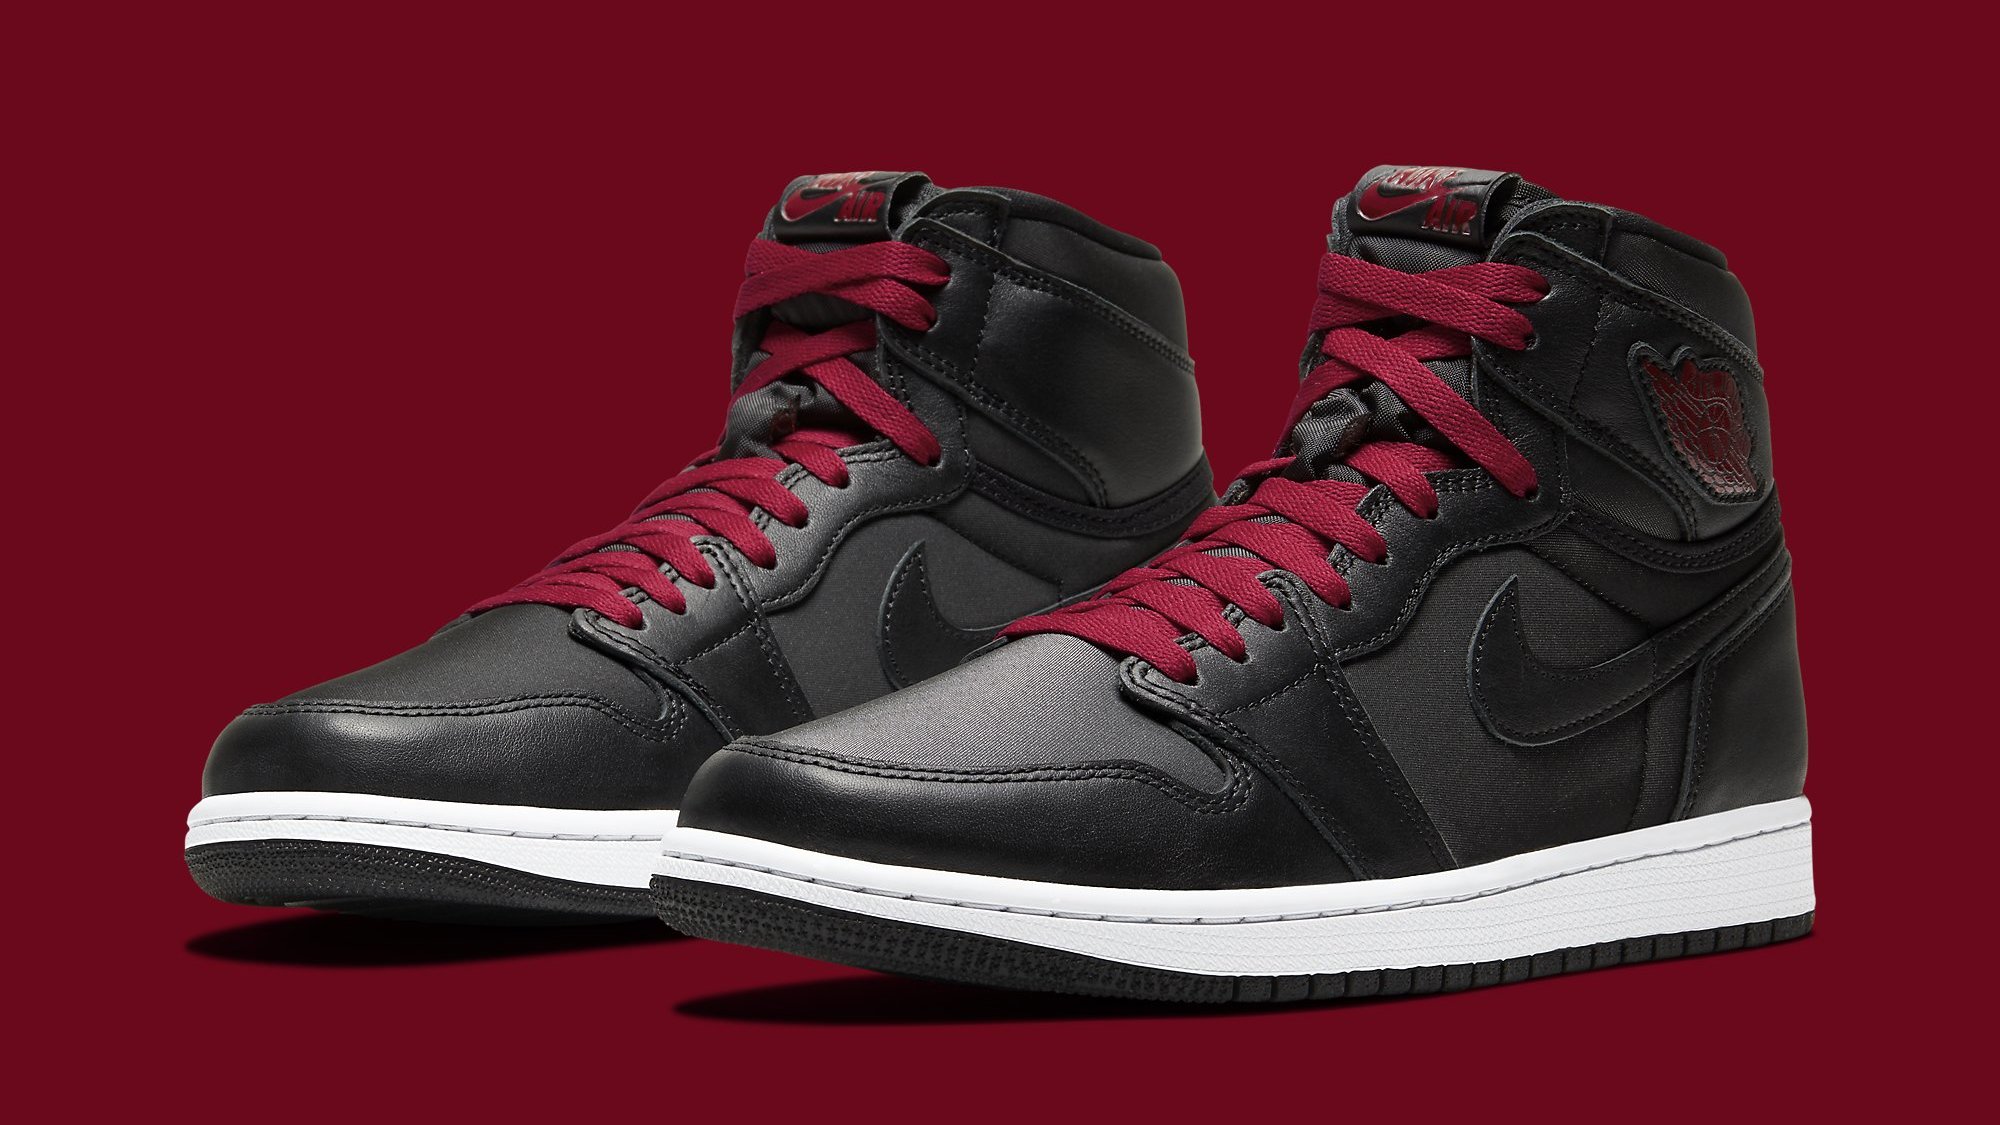 Satin Covers the Upper of This Upcoming Air Jordan 1 | Complex